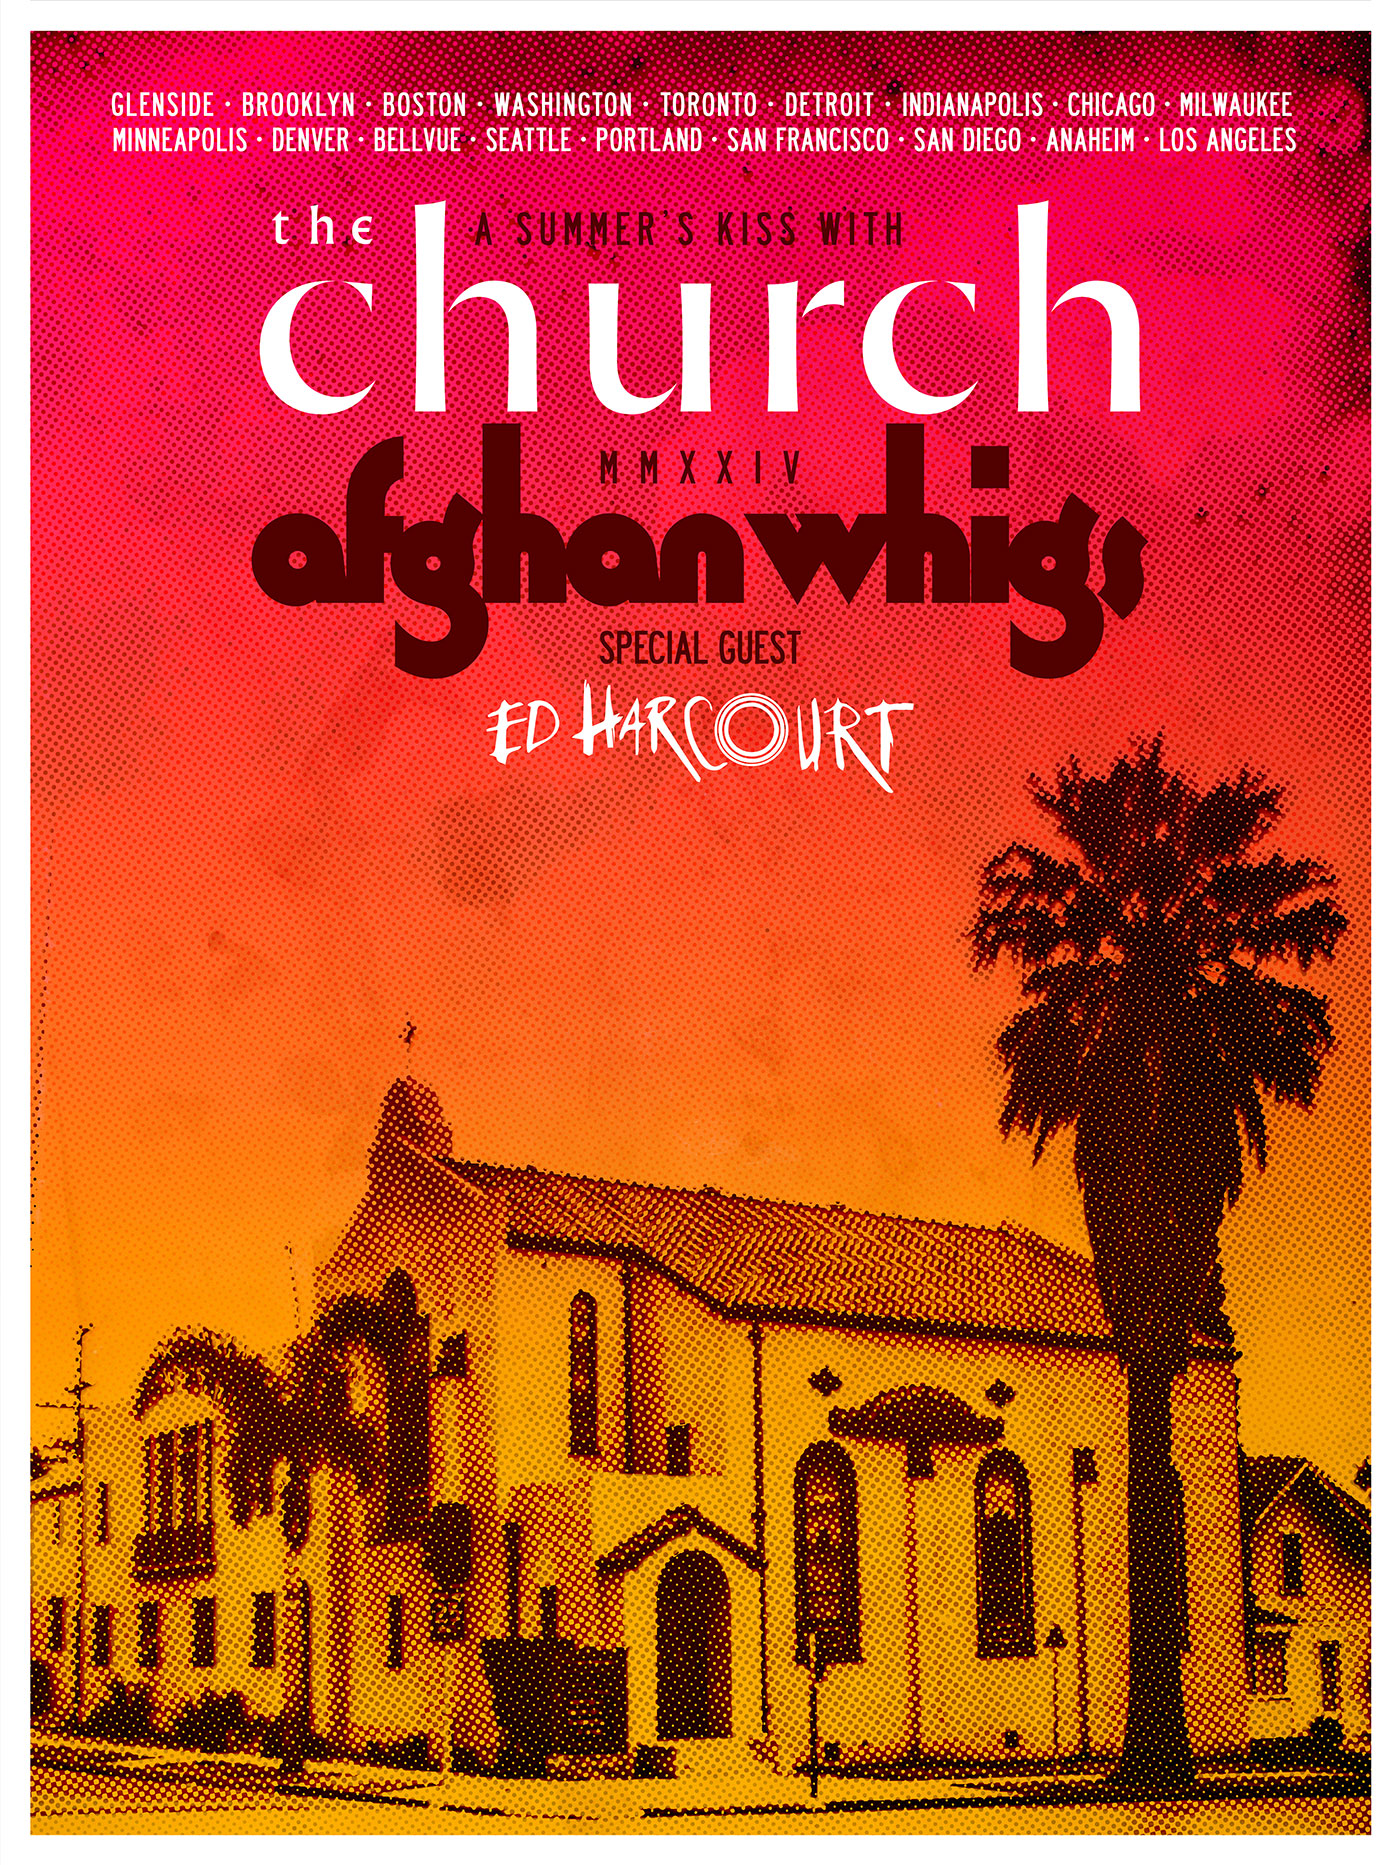 Tour - The Afghan Whigs